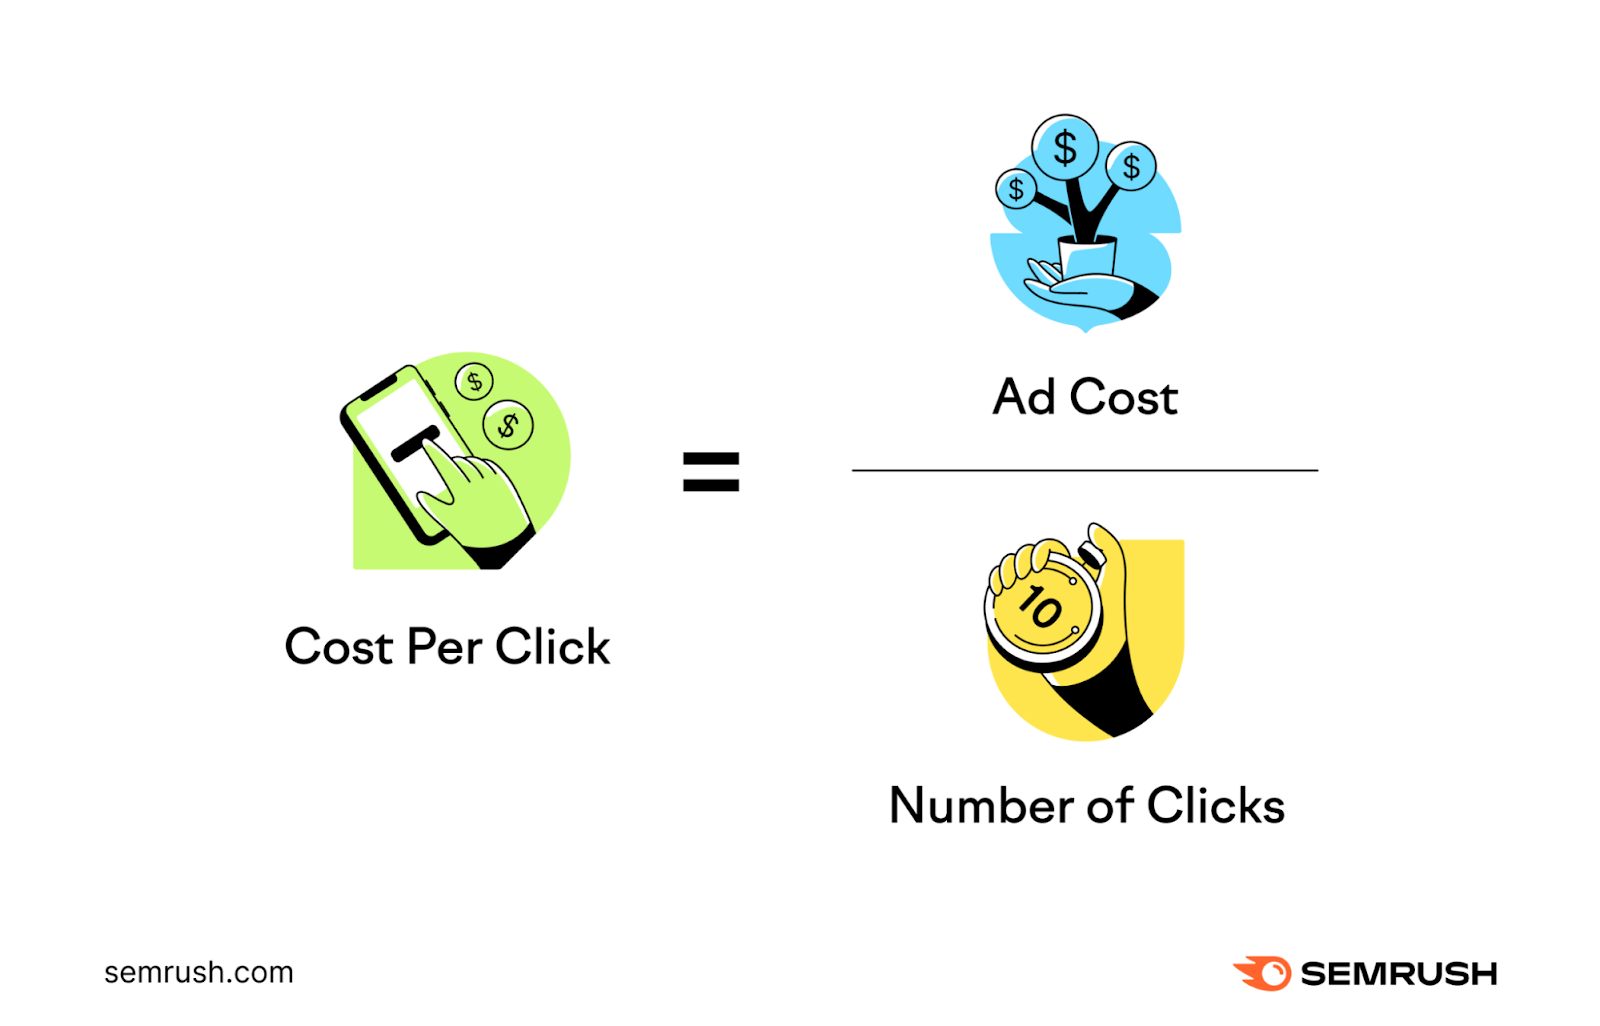 Cost per click is calculated by dividing ad cost with number of clicks